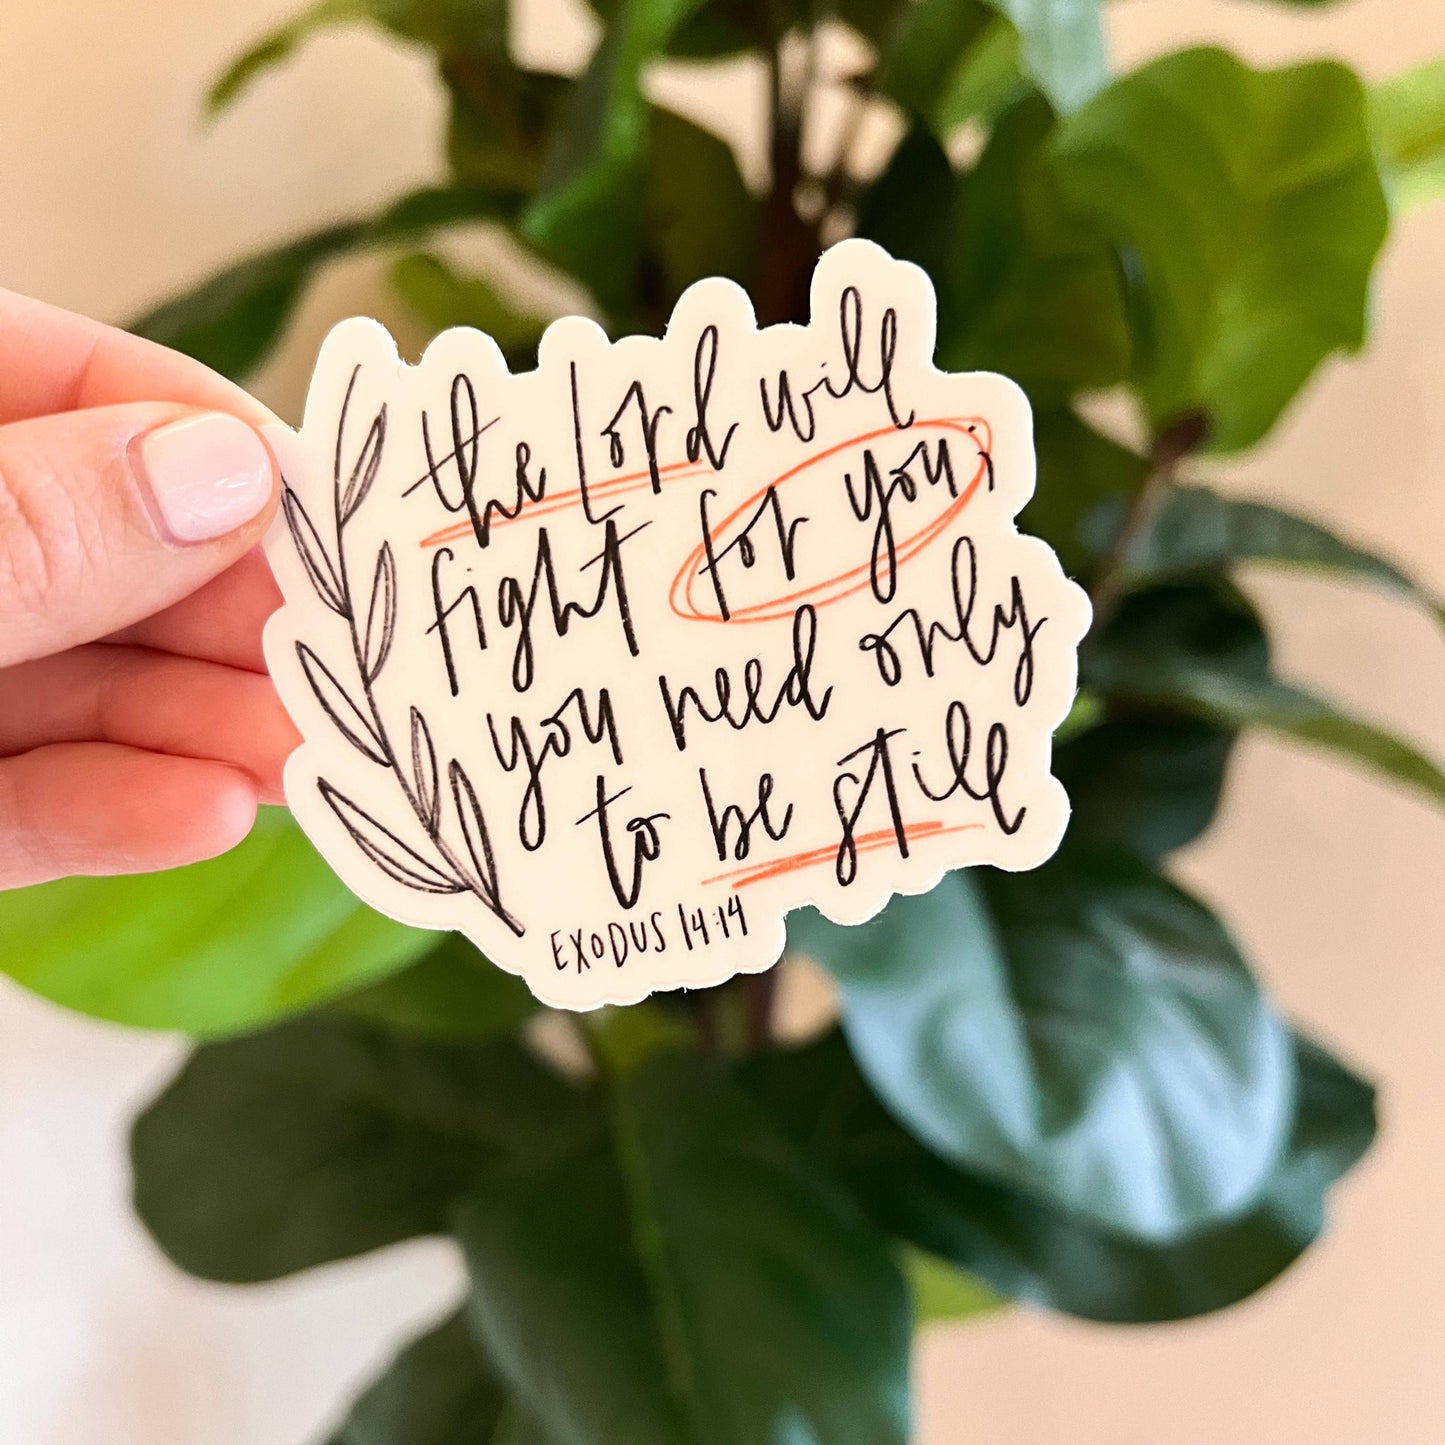 Exodus 14:14 Sticker - Branches: Branches of leaves *FREE SHIPPING with any order over $10